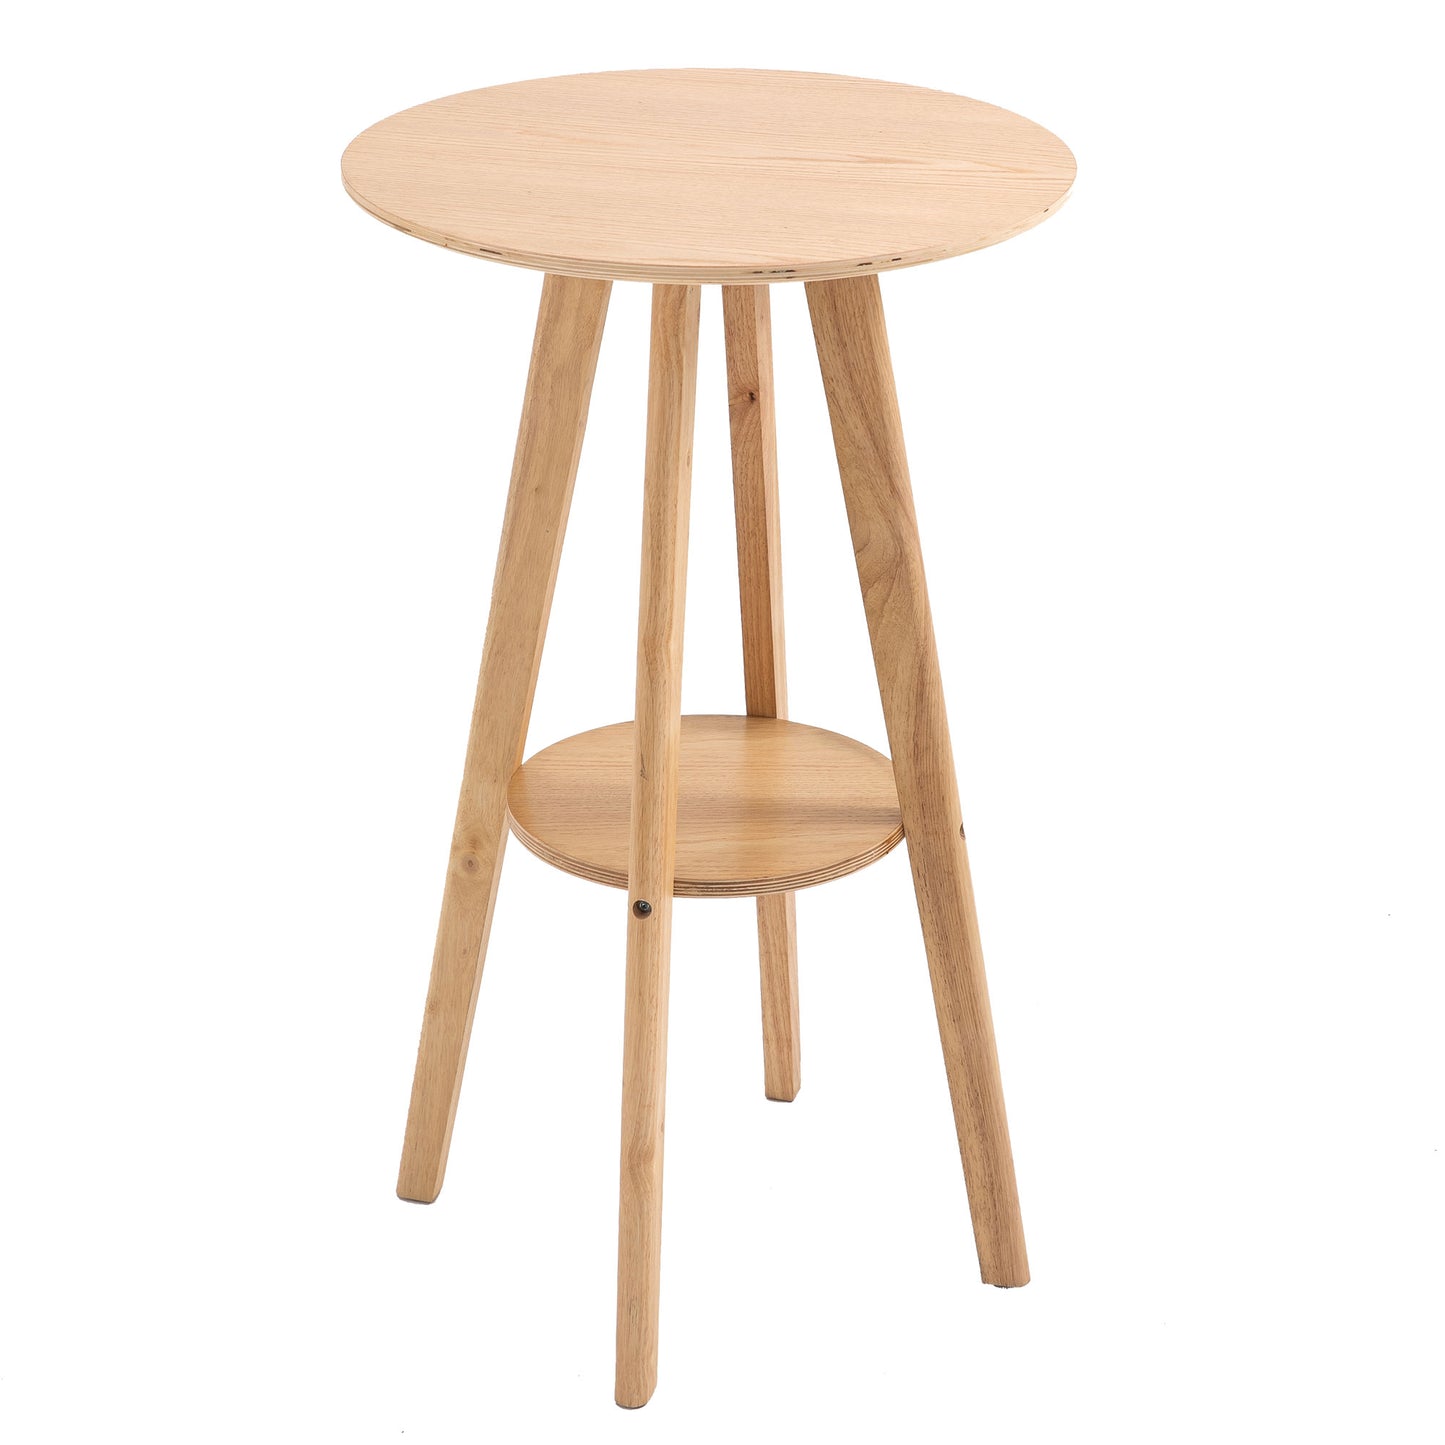 HOMCOM Round Cocktail Bar Table Dinning Table with Wood Legs for Pub, Dining Room, Kitchen & Home bar